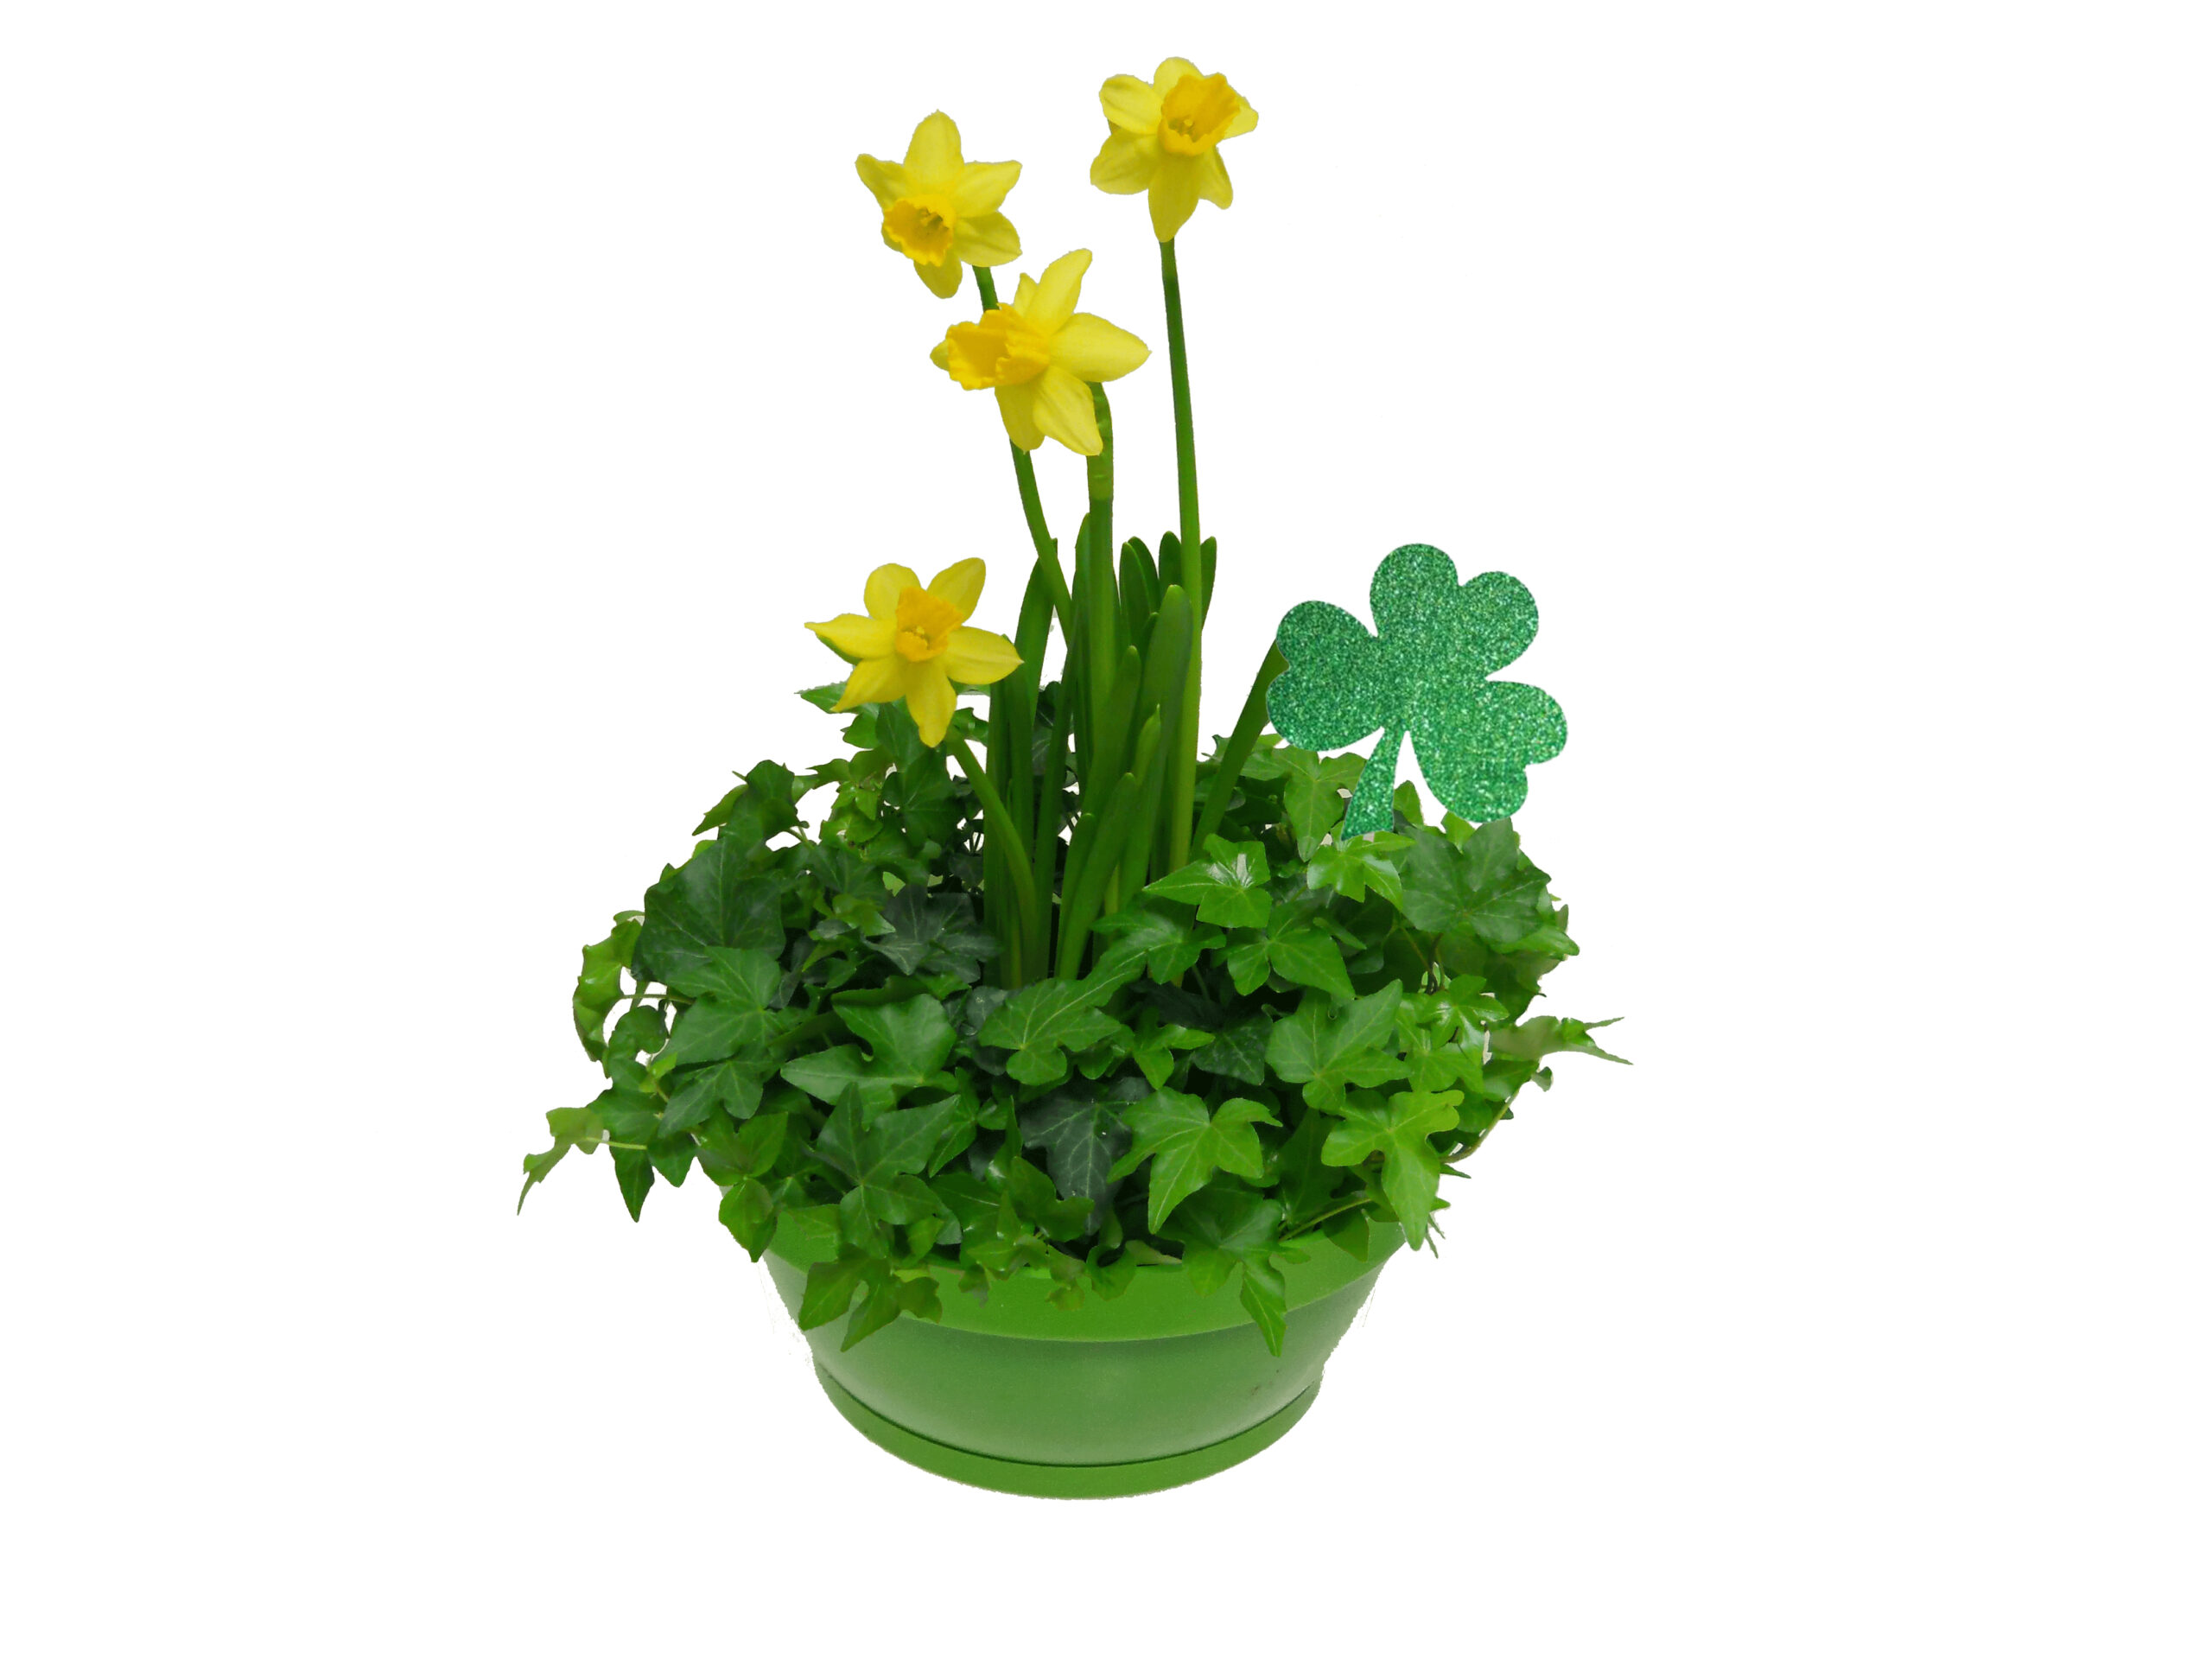 daffodil in green pot for st. patty's day